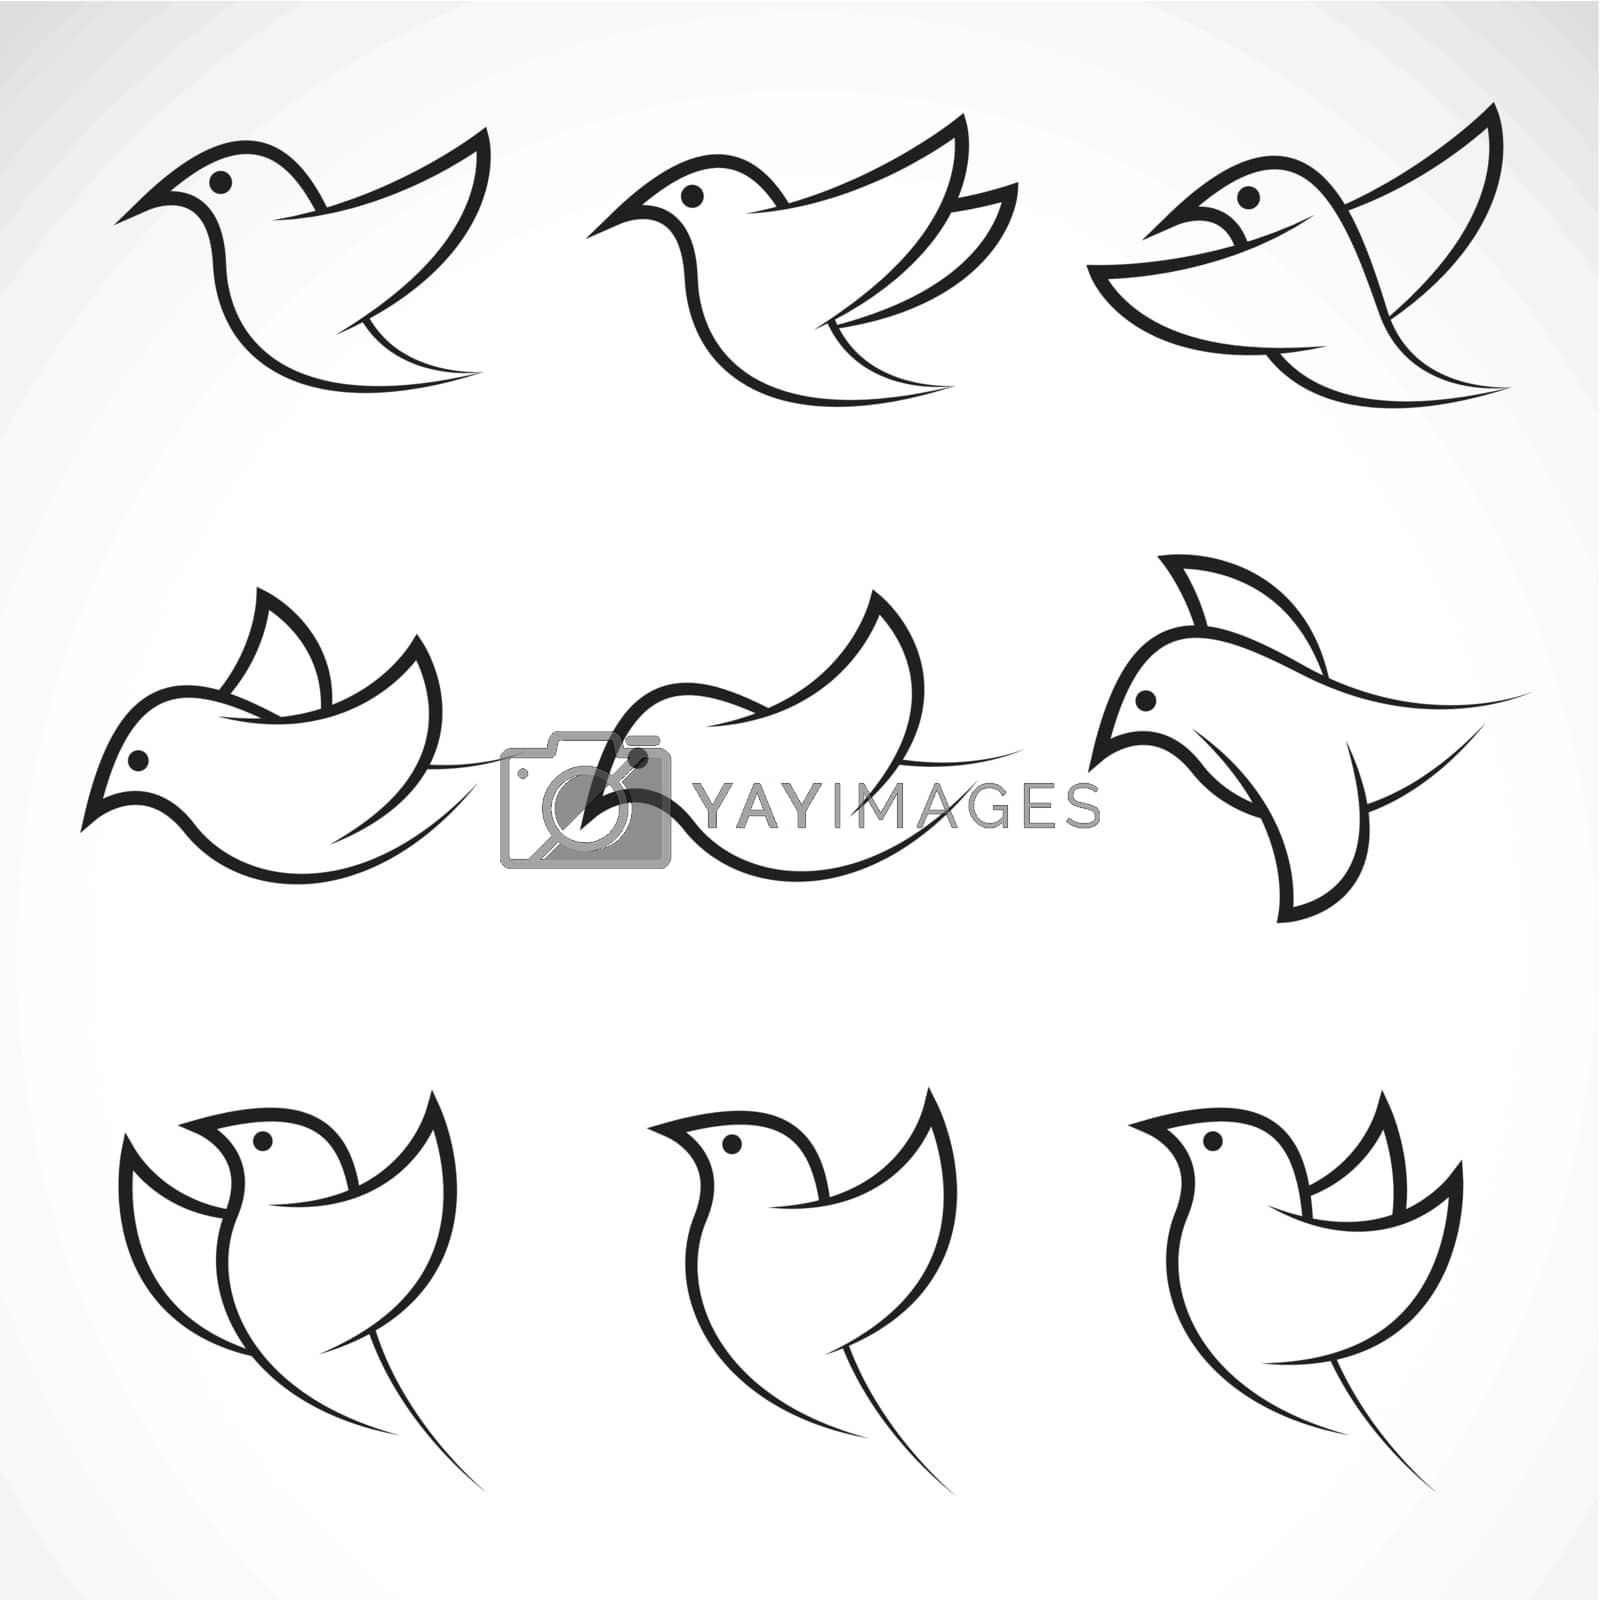 Royalty free image of Set of vector bird icons  by yod67